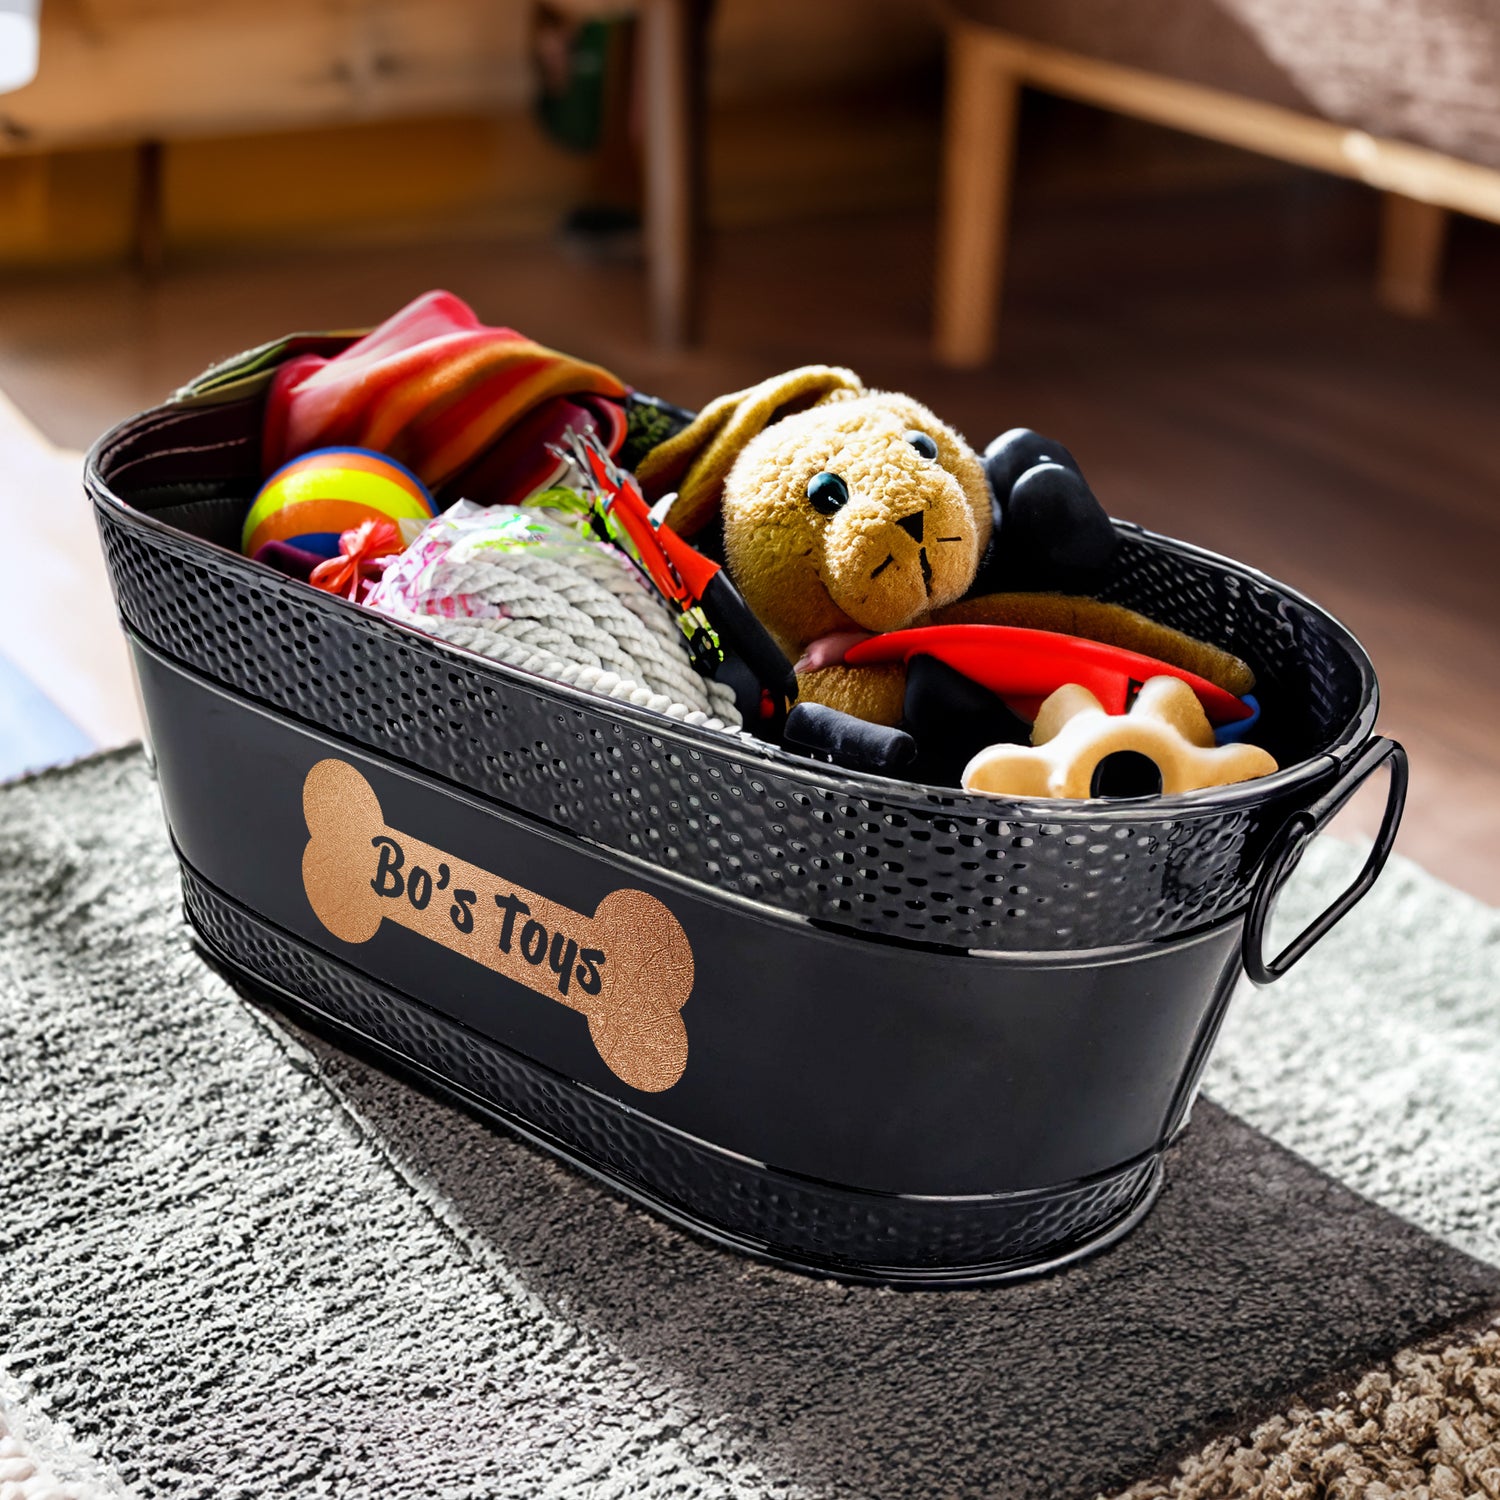 Metal large dog toy box with personalization.  Use in home, office or bedroom.